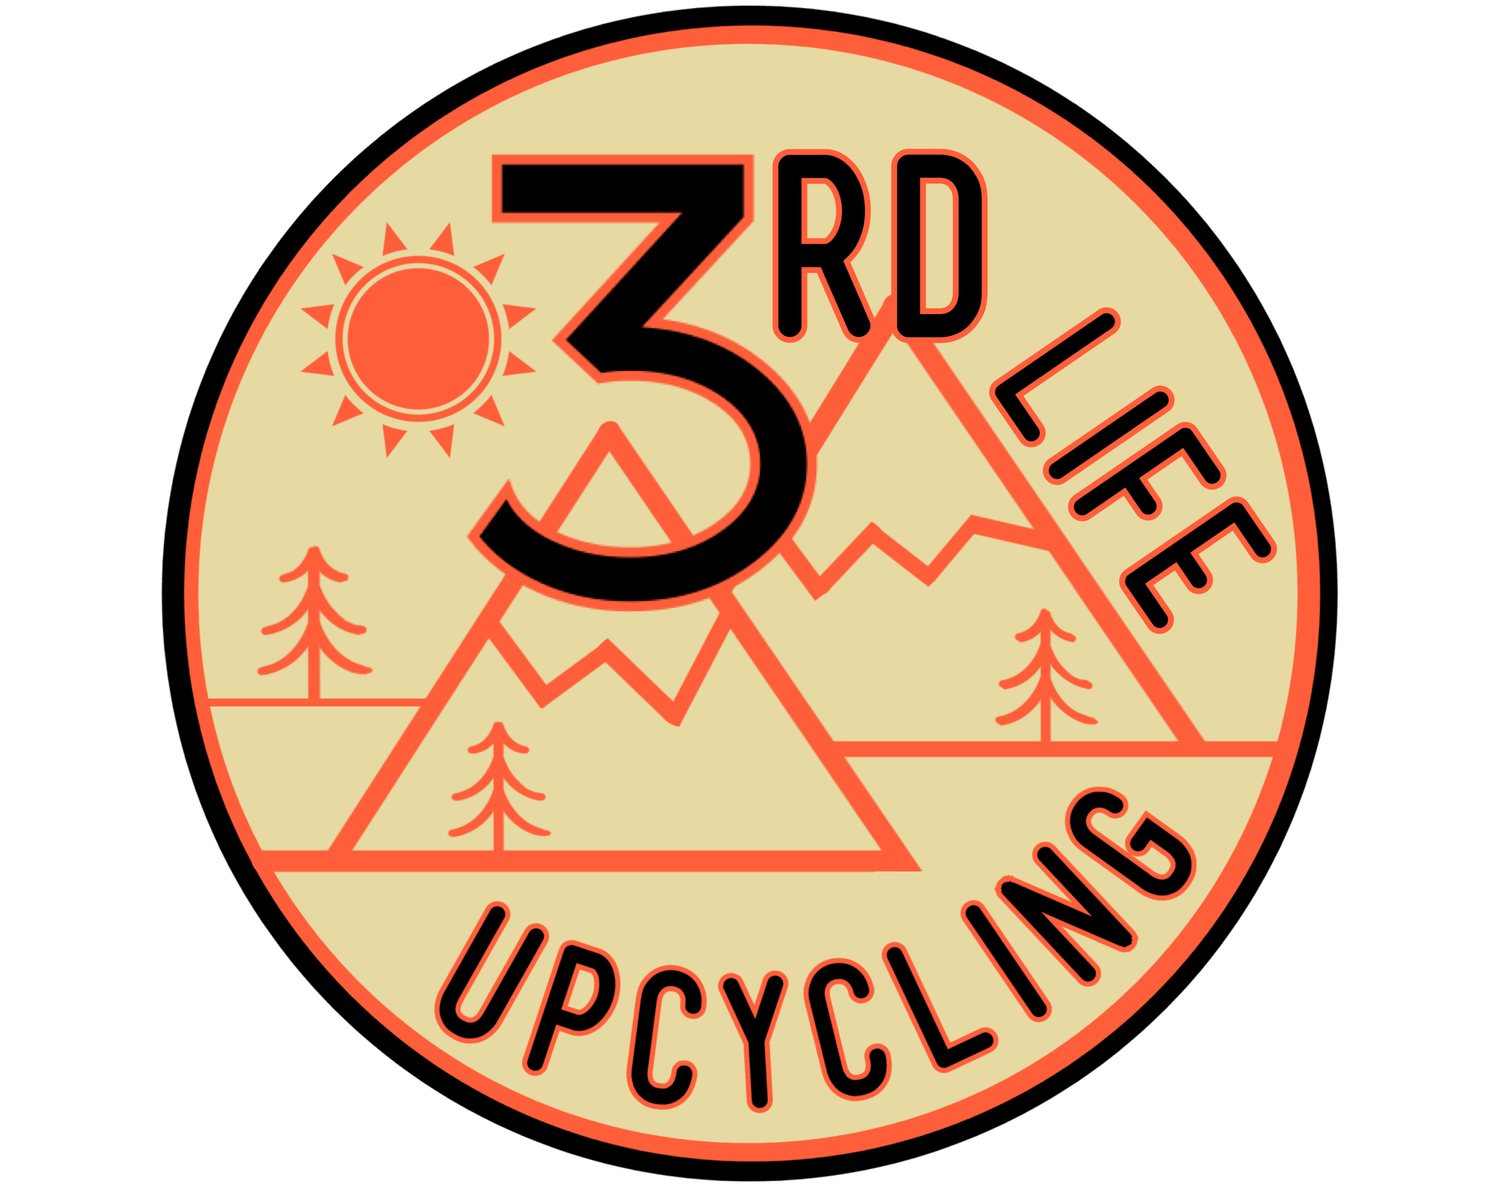 3rd Life Upcycling